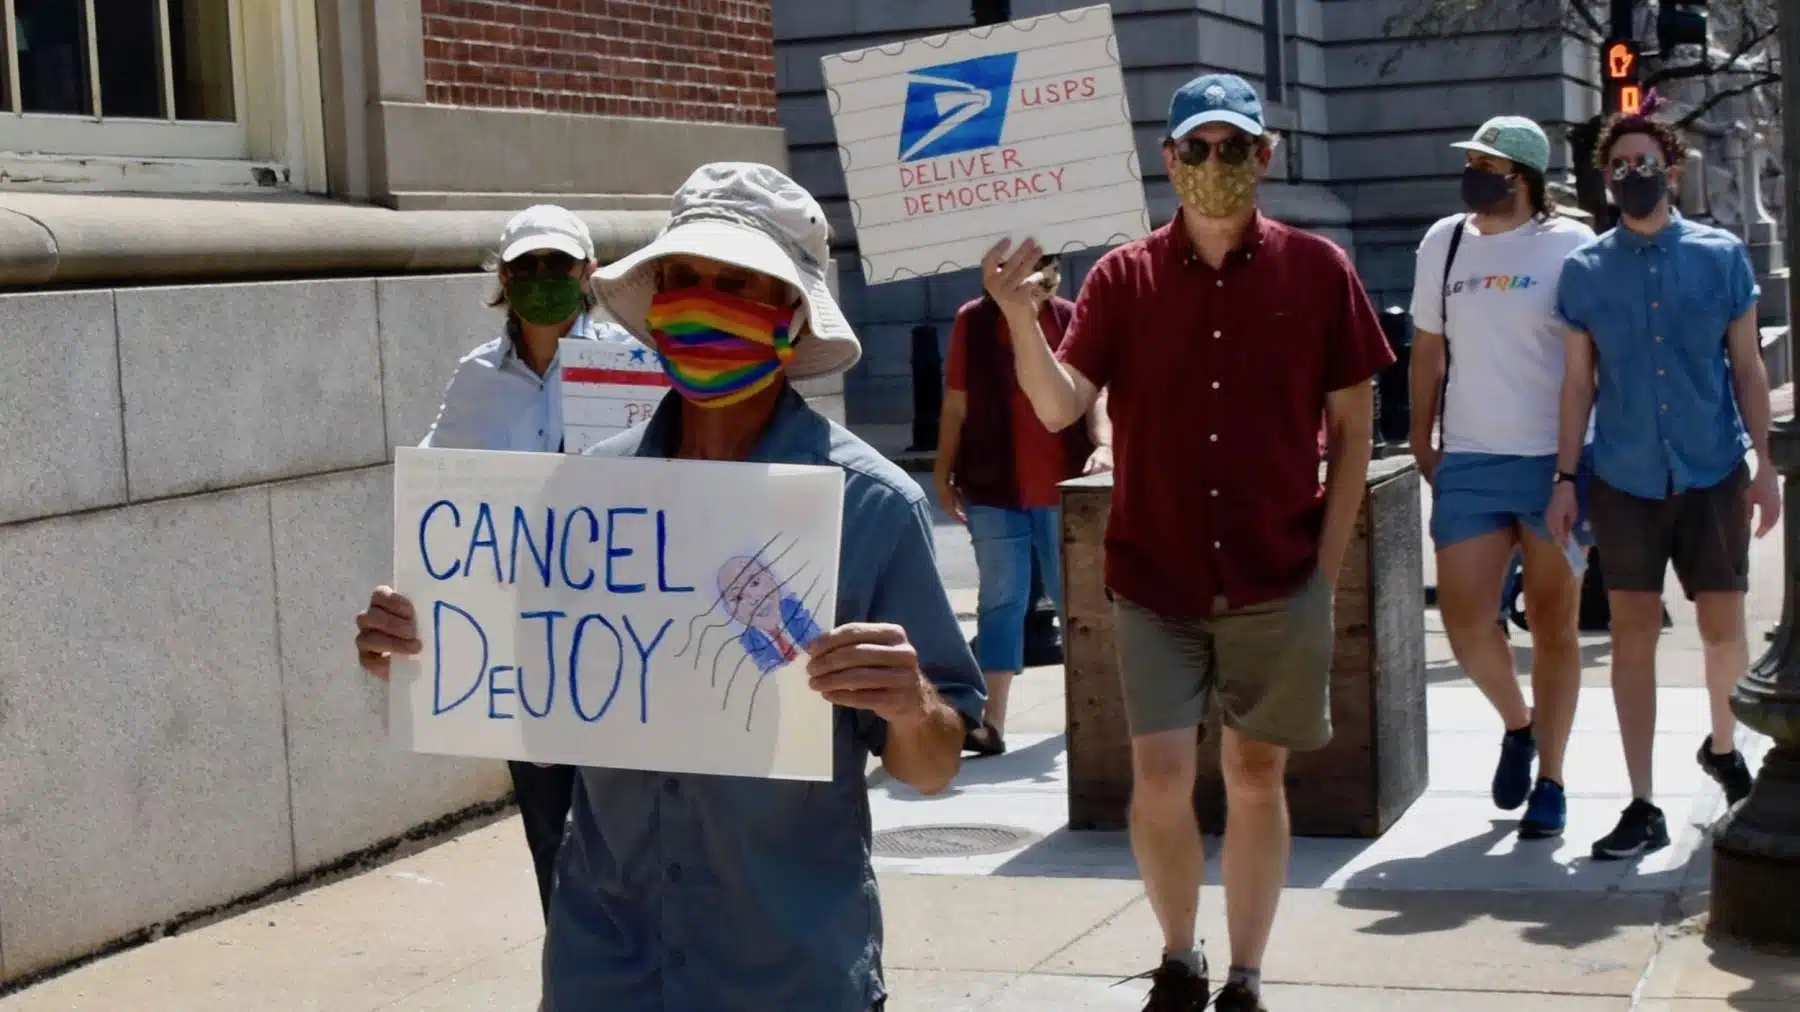 Rhode Island News: Providence protest to support the Post Office part of a nation-wide effort